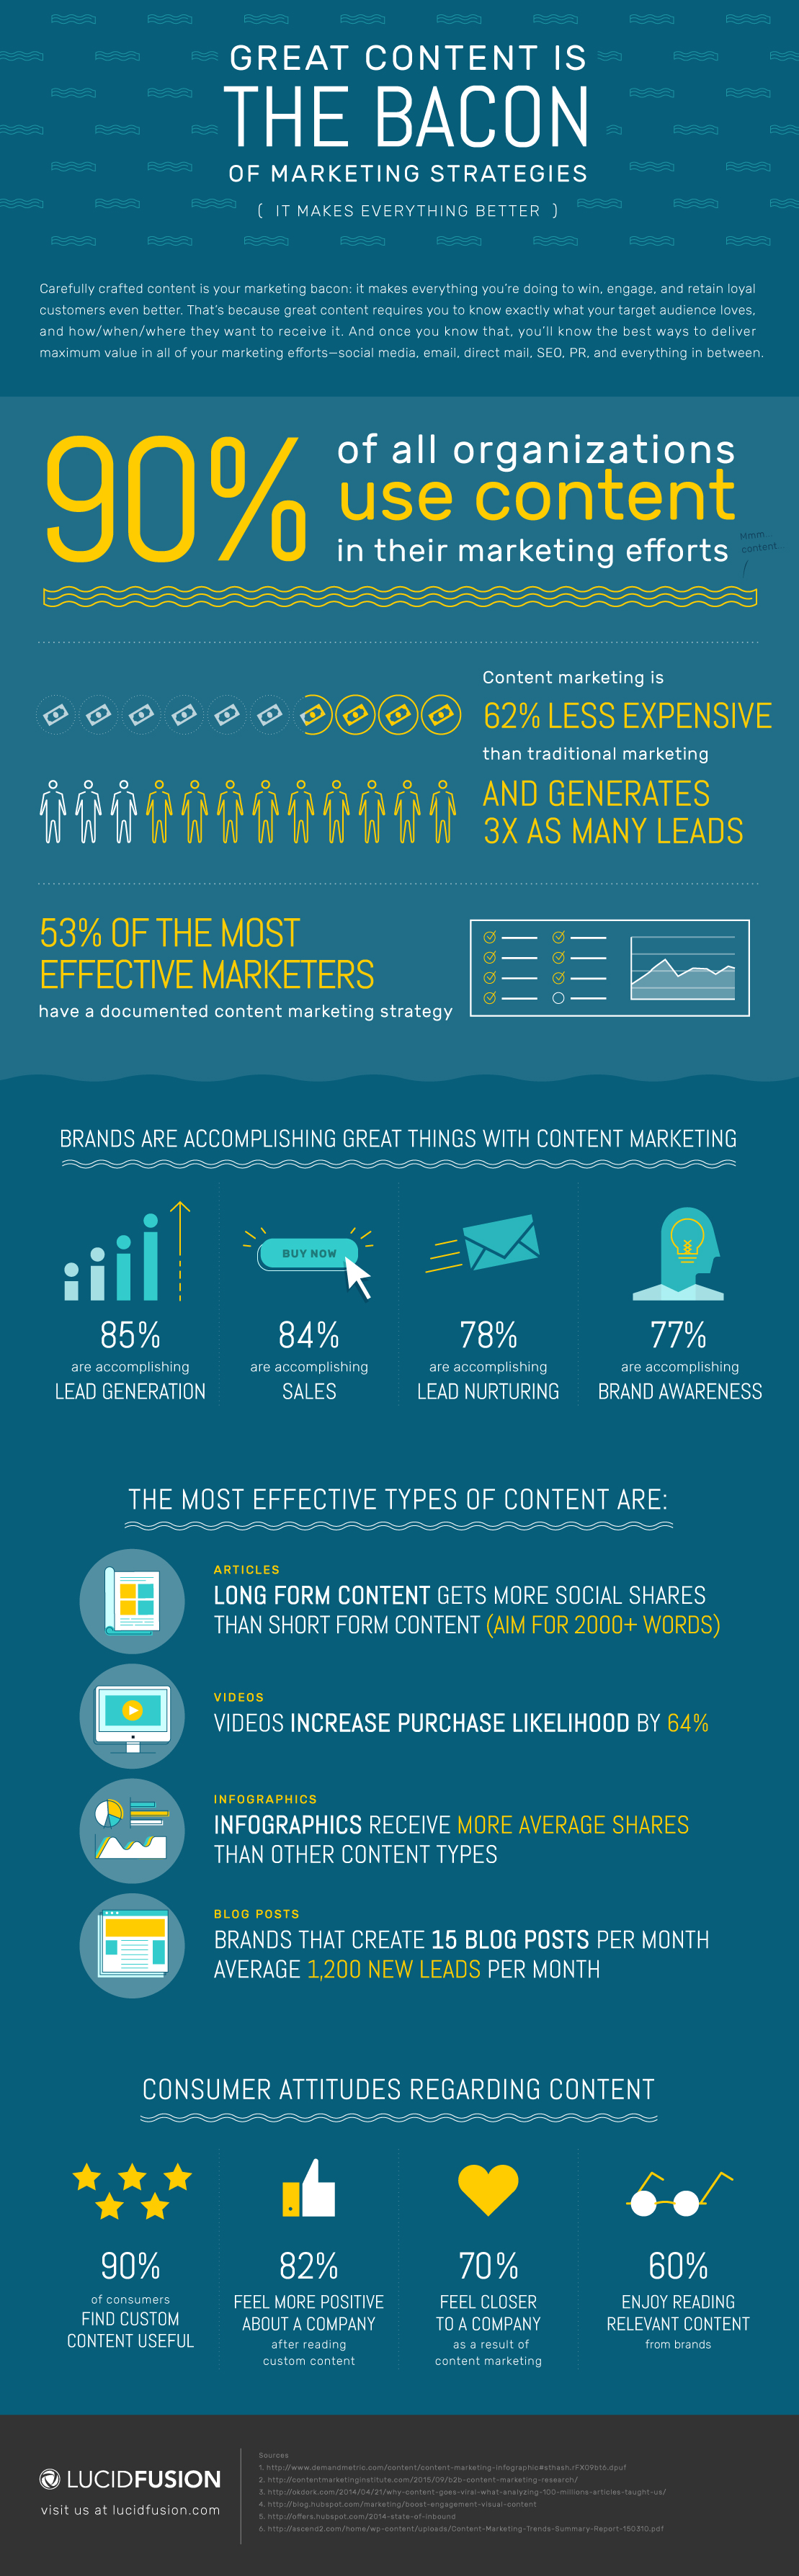 LucidFusion_Great_Content_Infographic